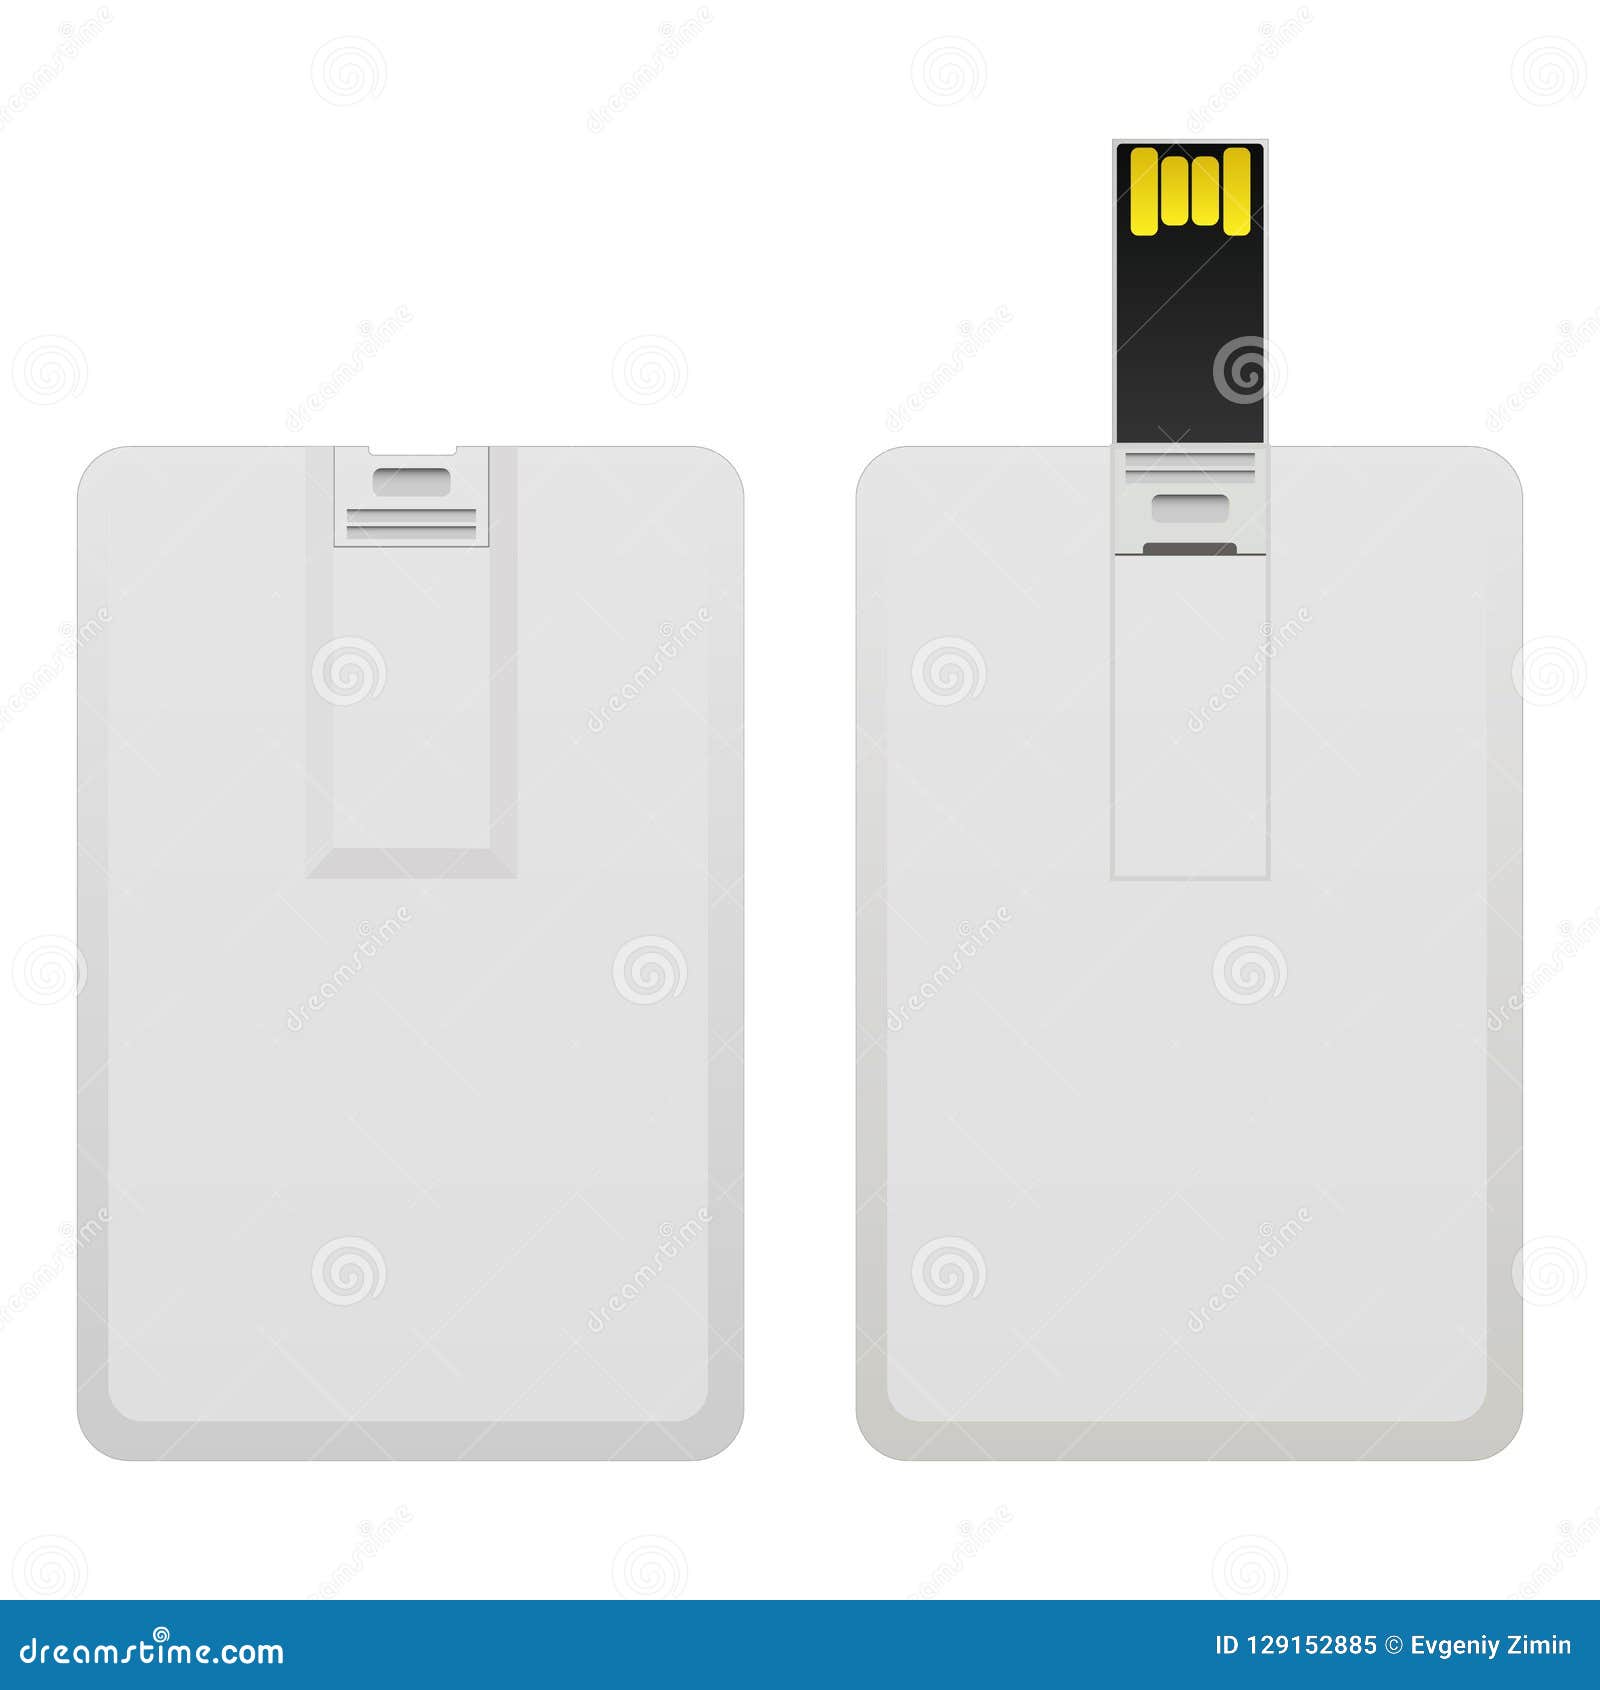 Blank Wafer Usb Flash Card Mock Up Isolated On White Background Stock Vector Illustration Of Design Computer 129152885